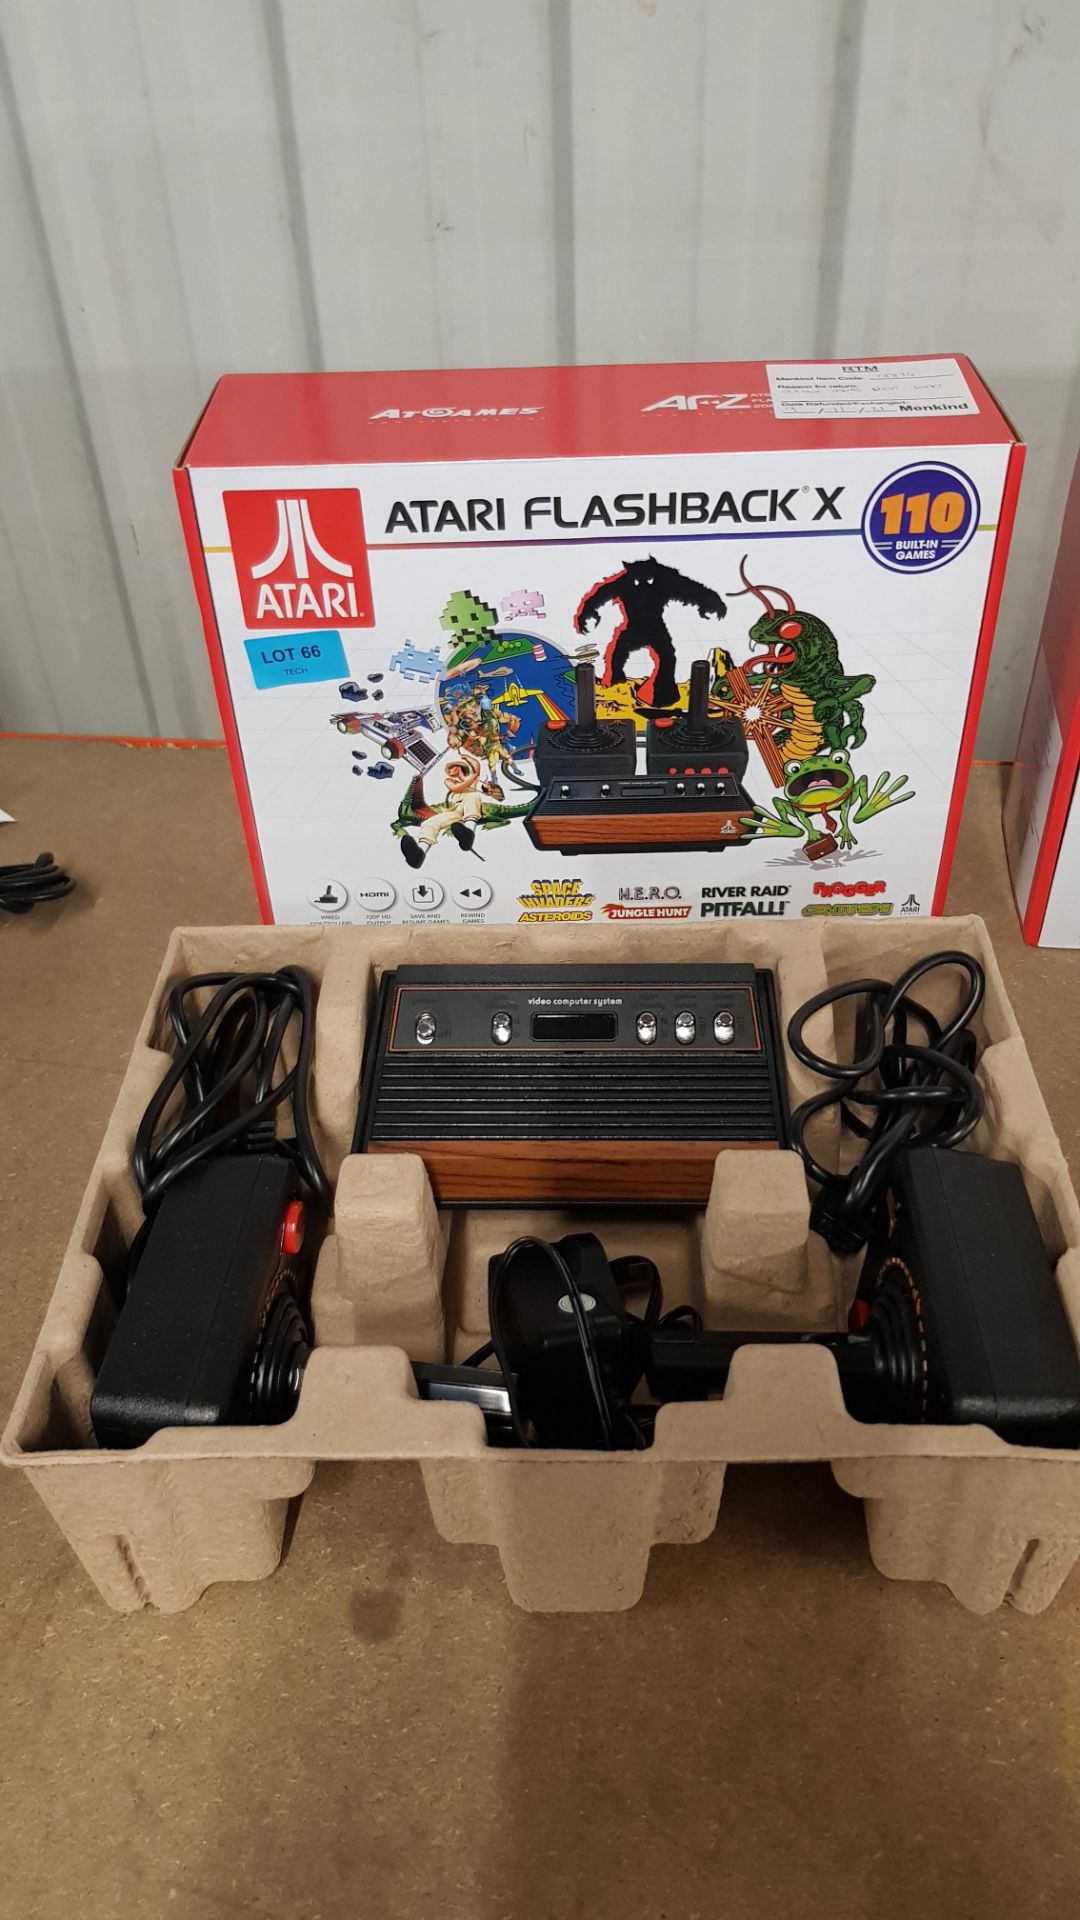 (11B) RRP £75. Atari Flashback X Retro Console With 110 Games. (Unit Has Return To Manufacturer... - Image 12 of 12